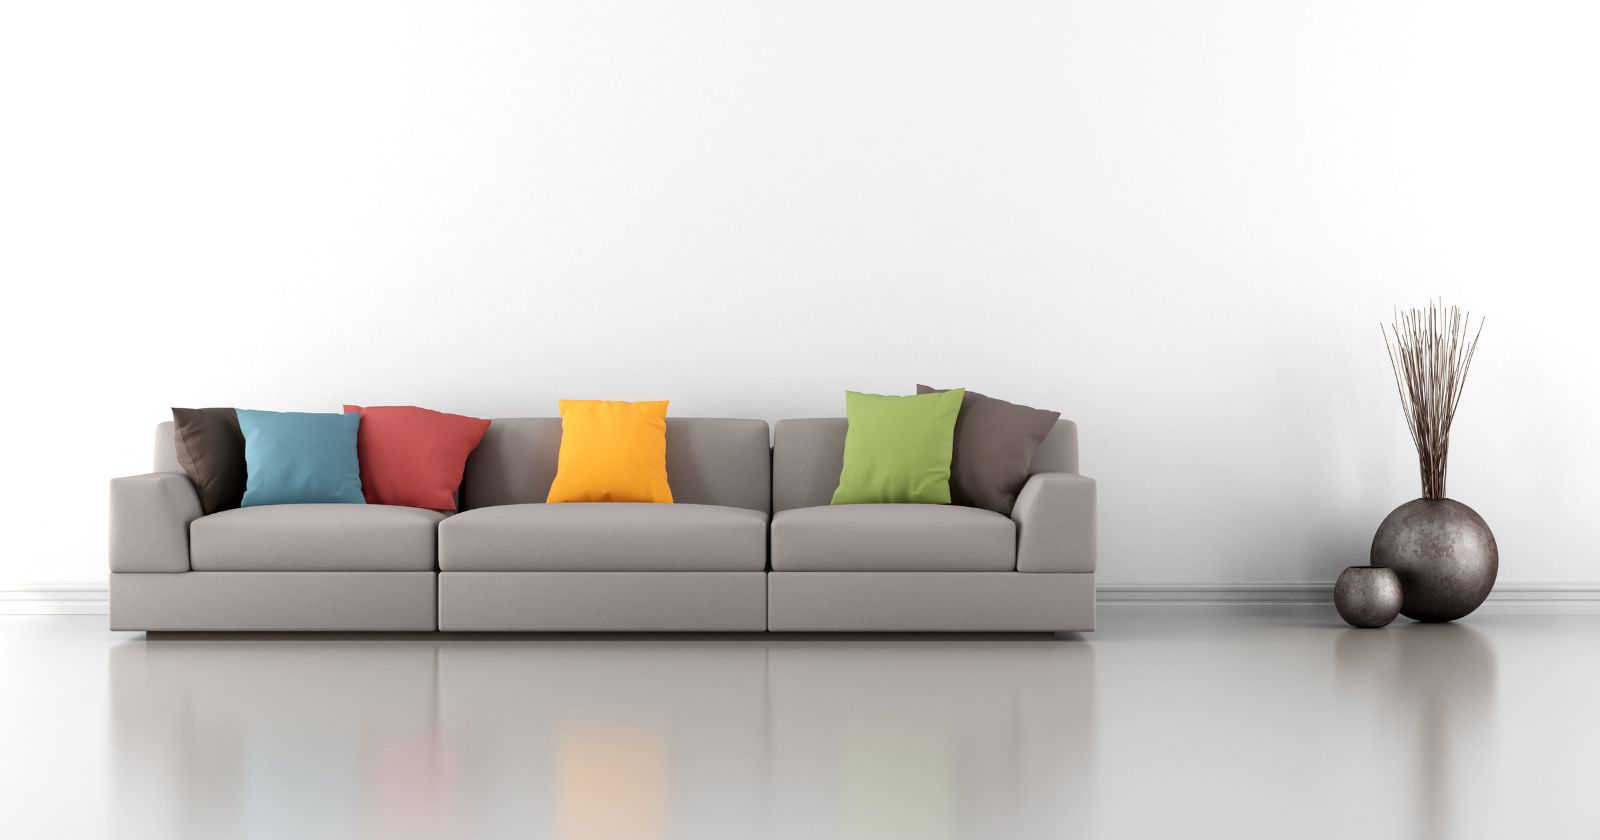 8 Easy Solutions for Sliding Couch Cushions